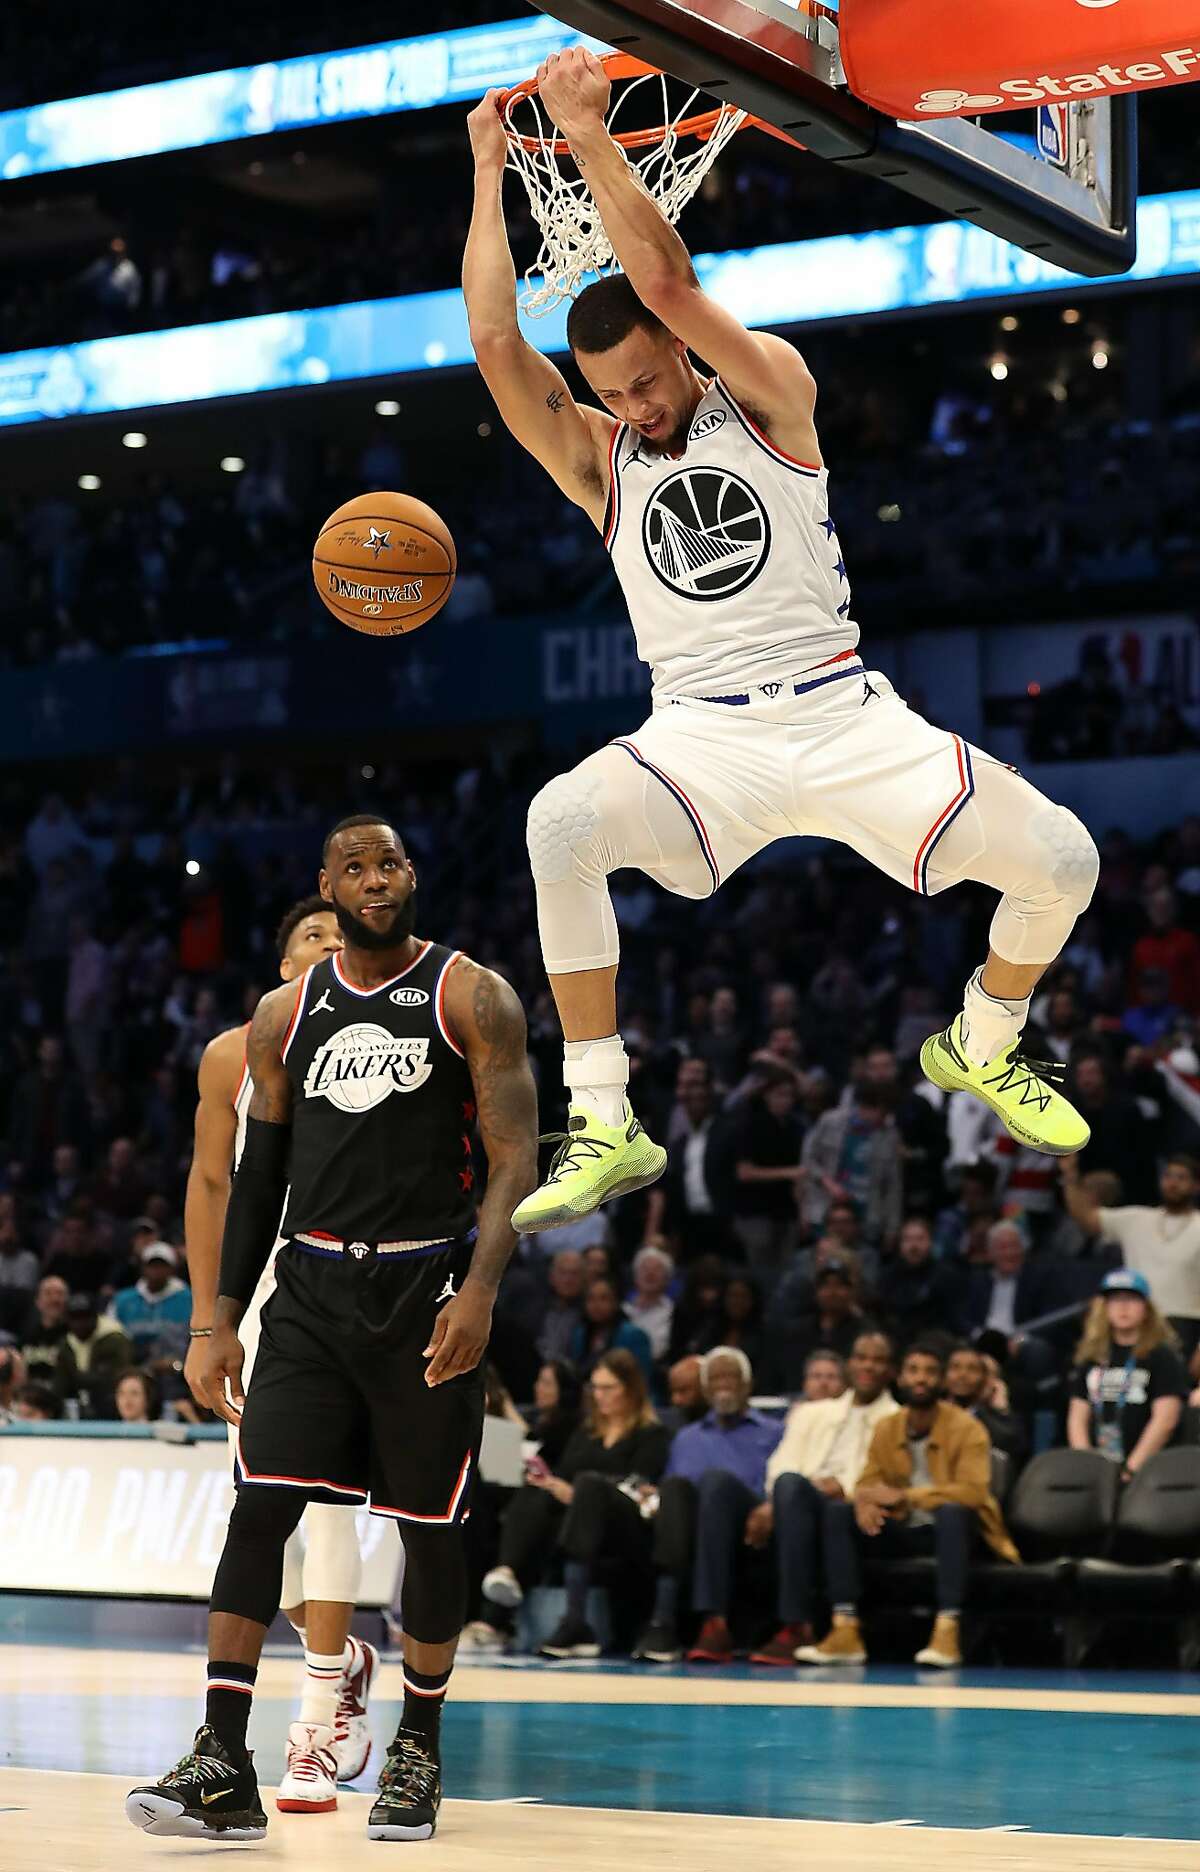 Making of a rare Stephen Curry dunk: ‘Doesn’t just happen by accident’